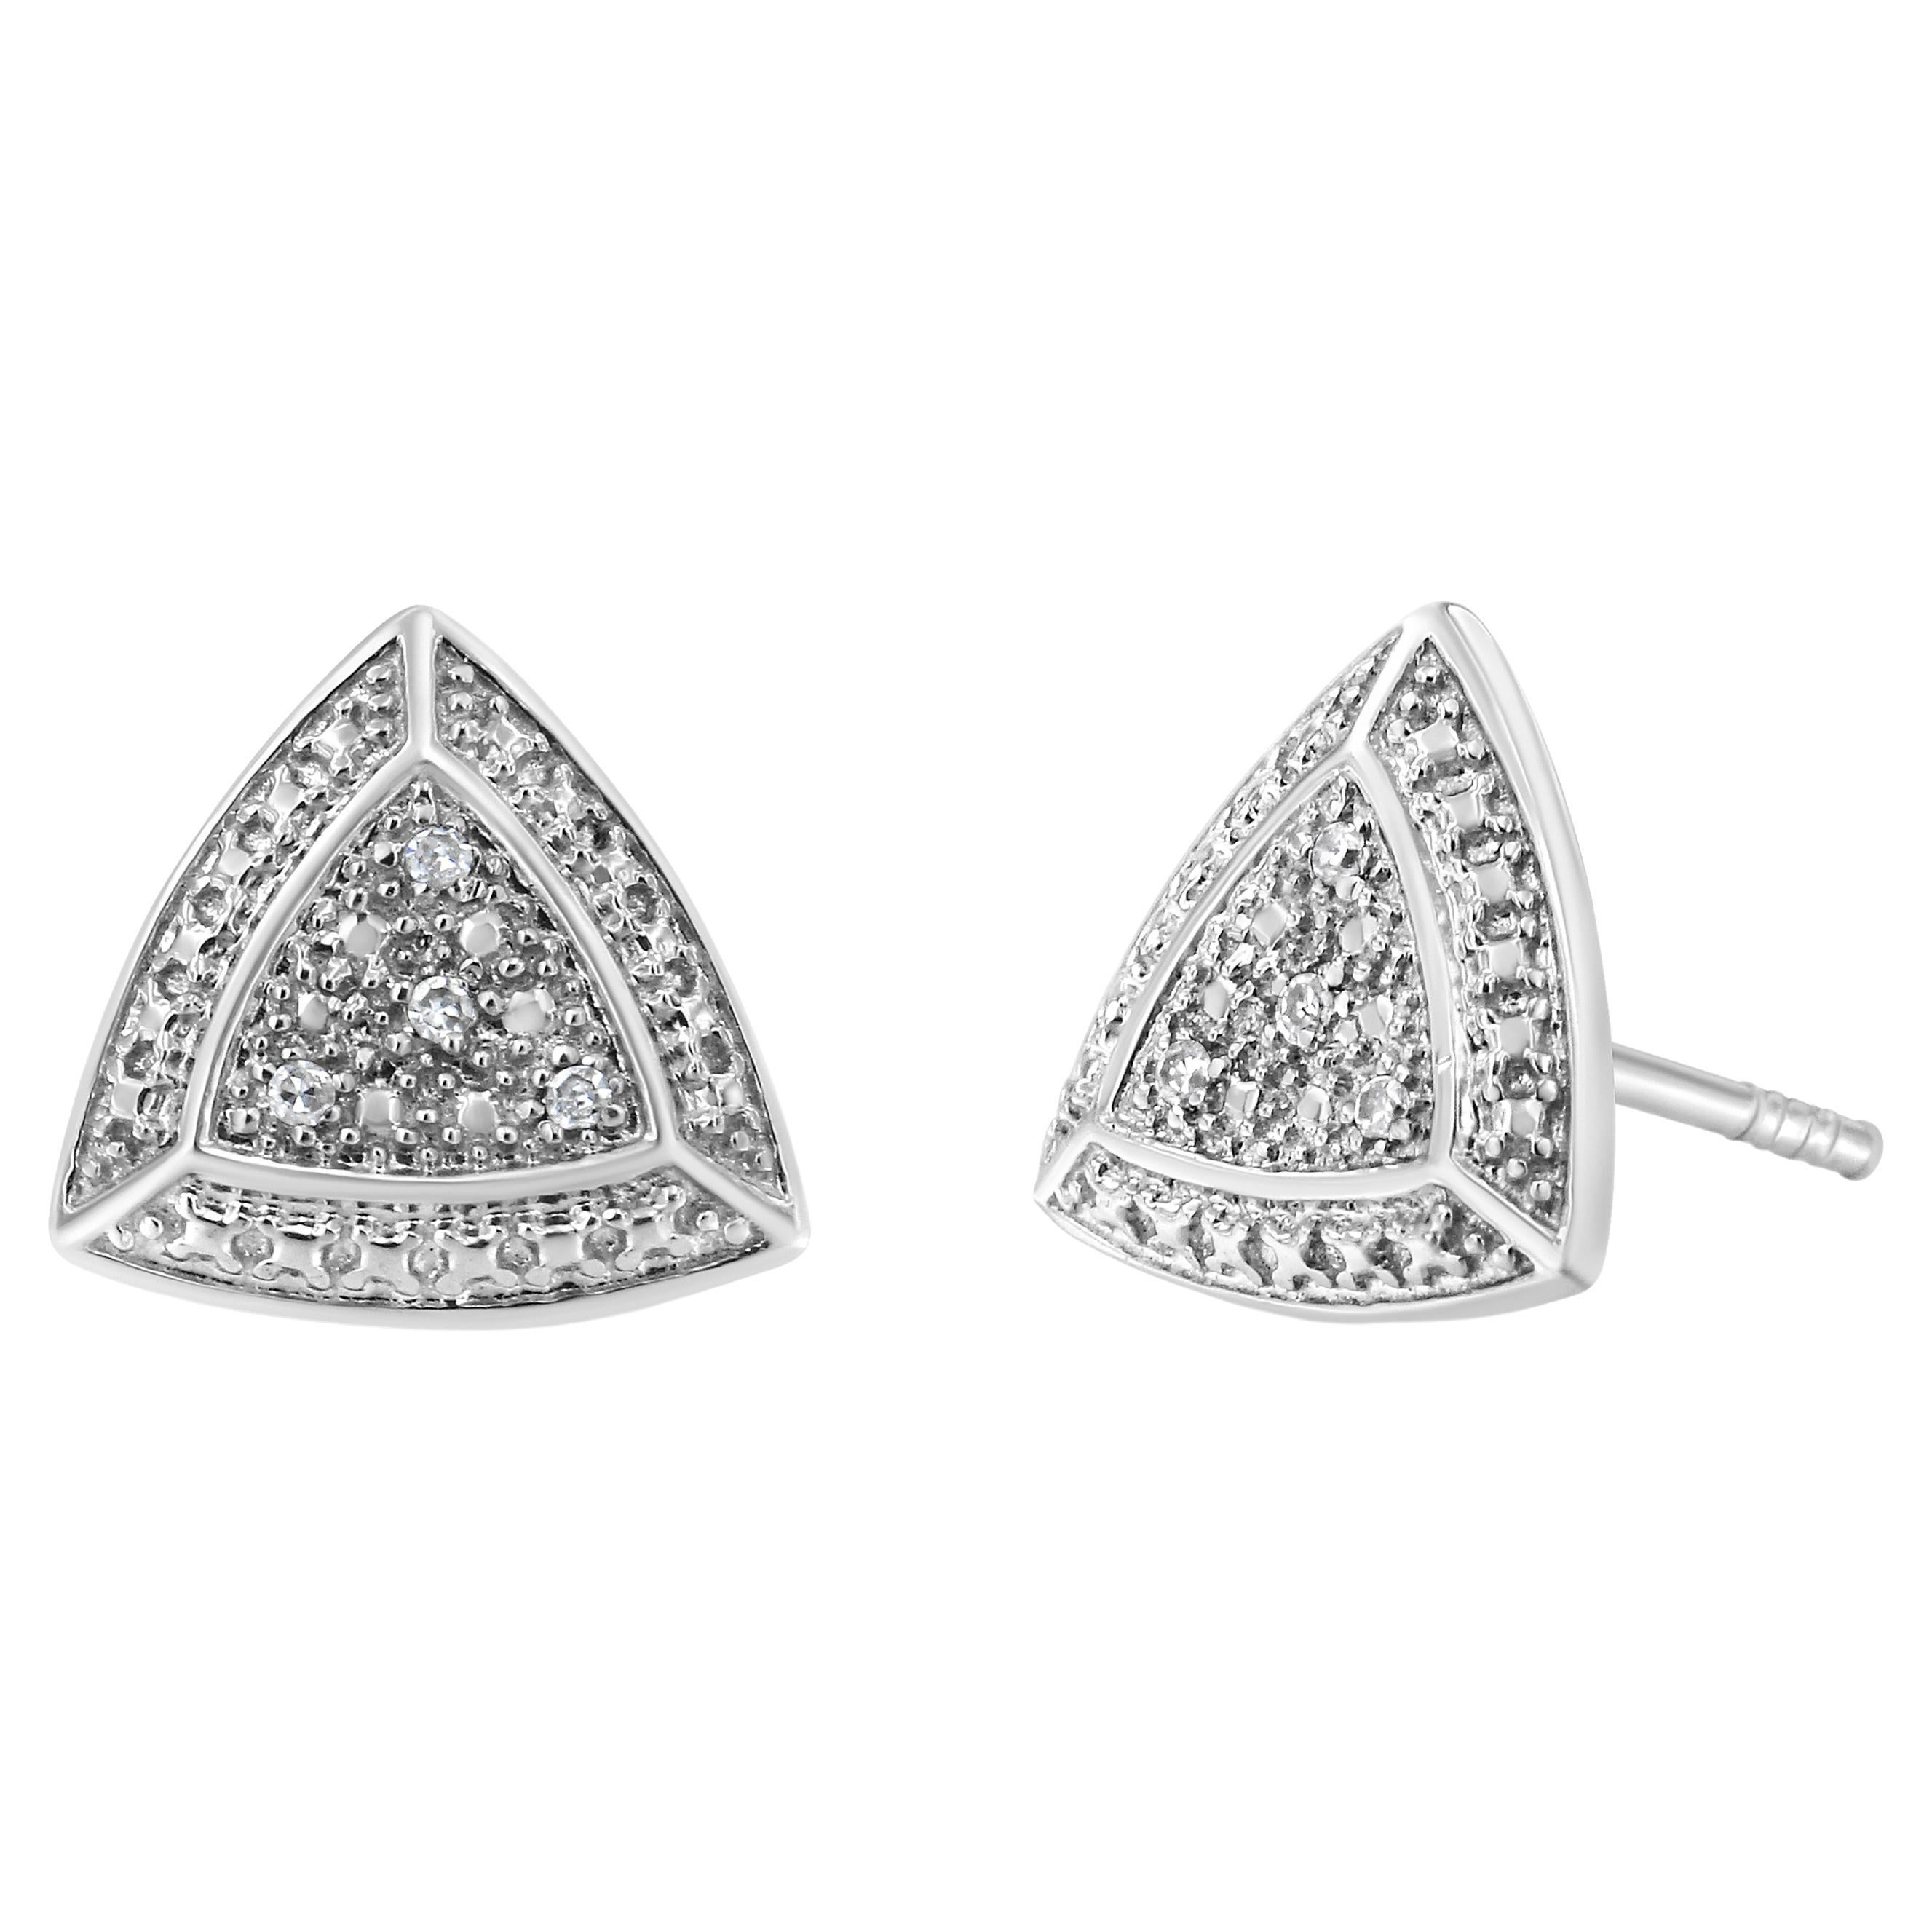 .925 Sterling Silver Diamond-Accented 4-Stone Halo-Style Stud Earrings